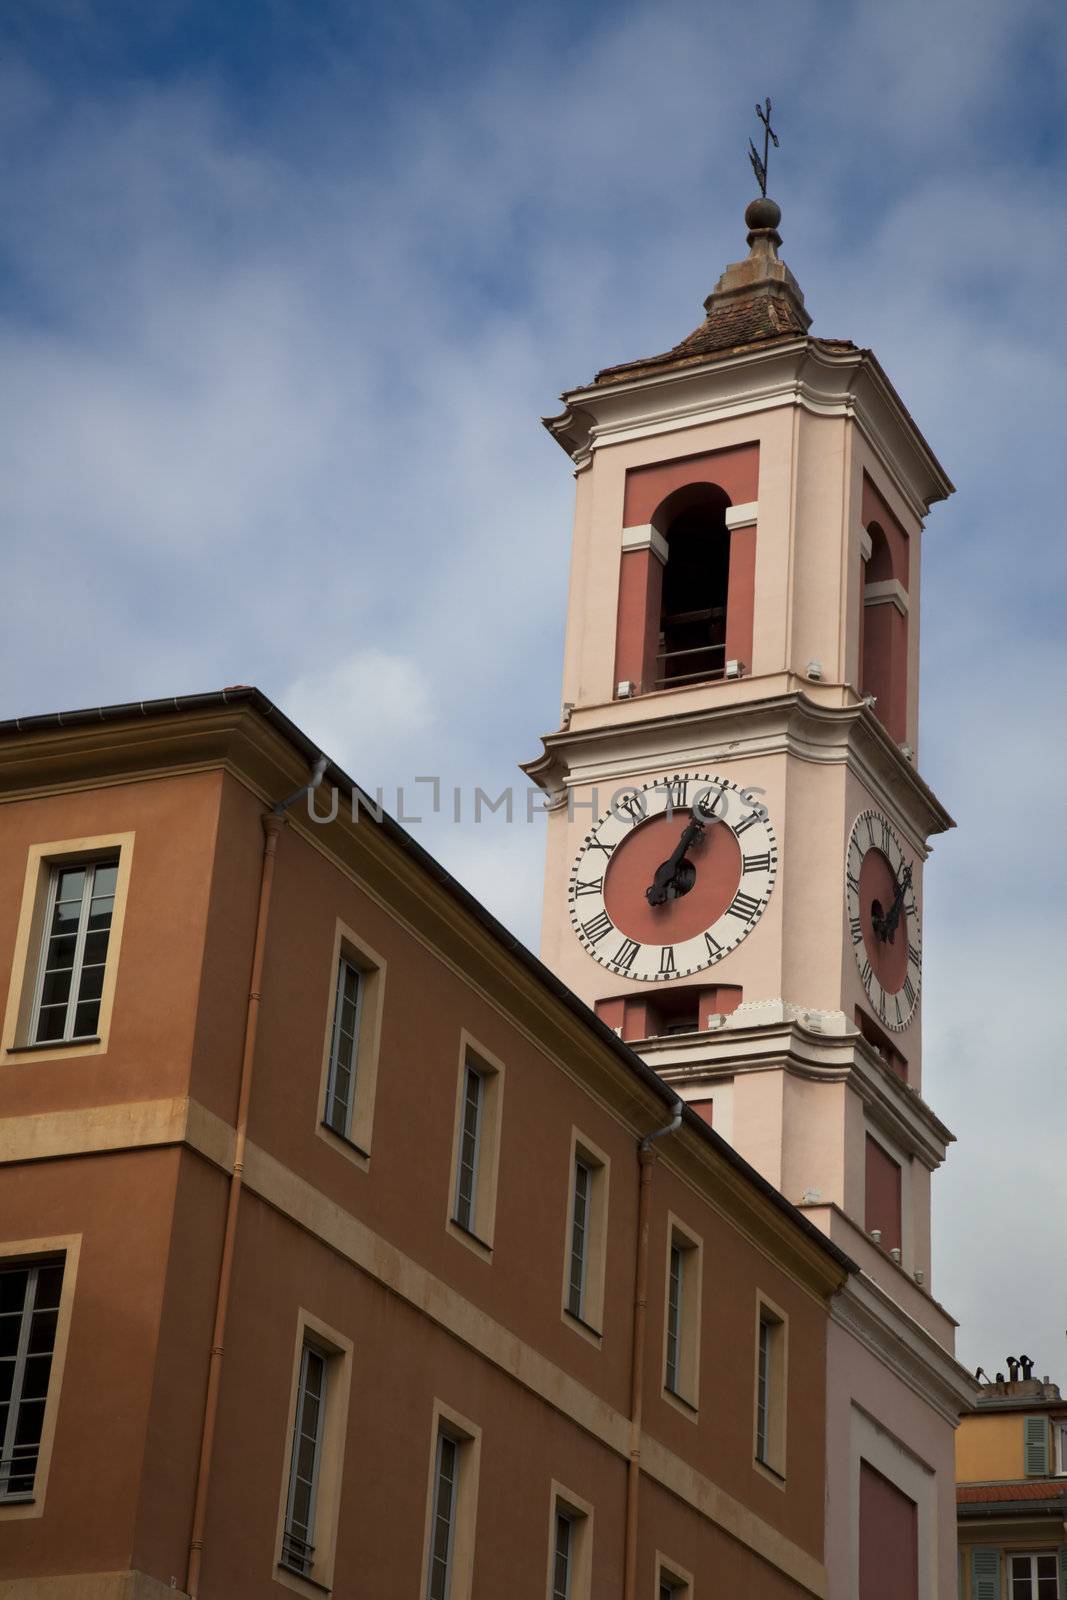 Clock tower of Rusca Palace in Nice France, on a cloudy day.